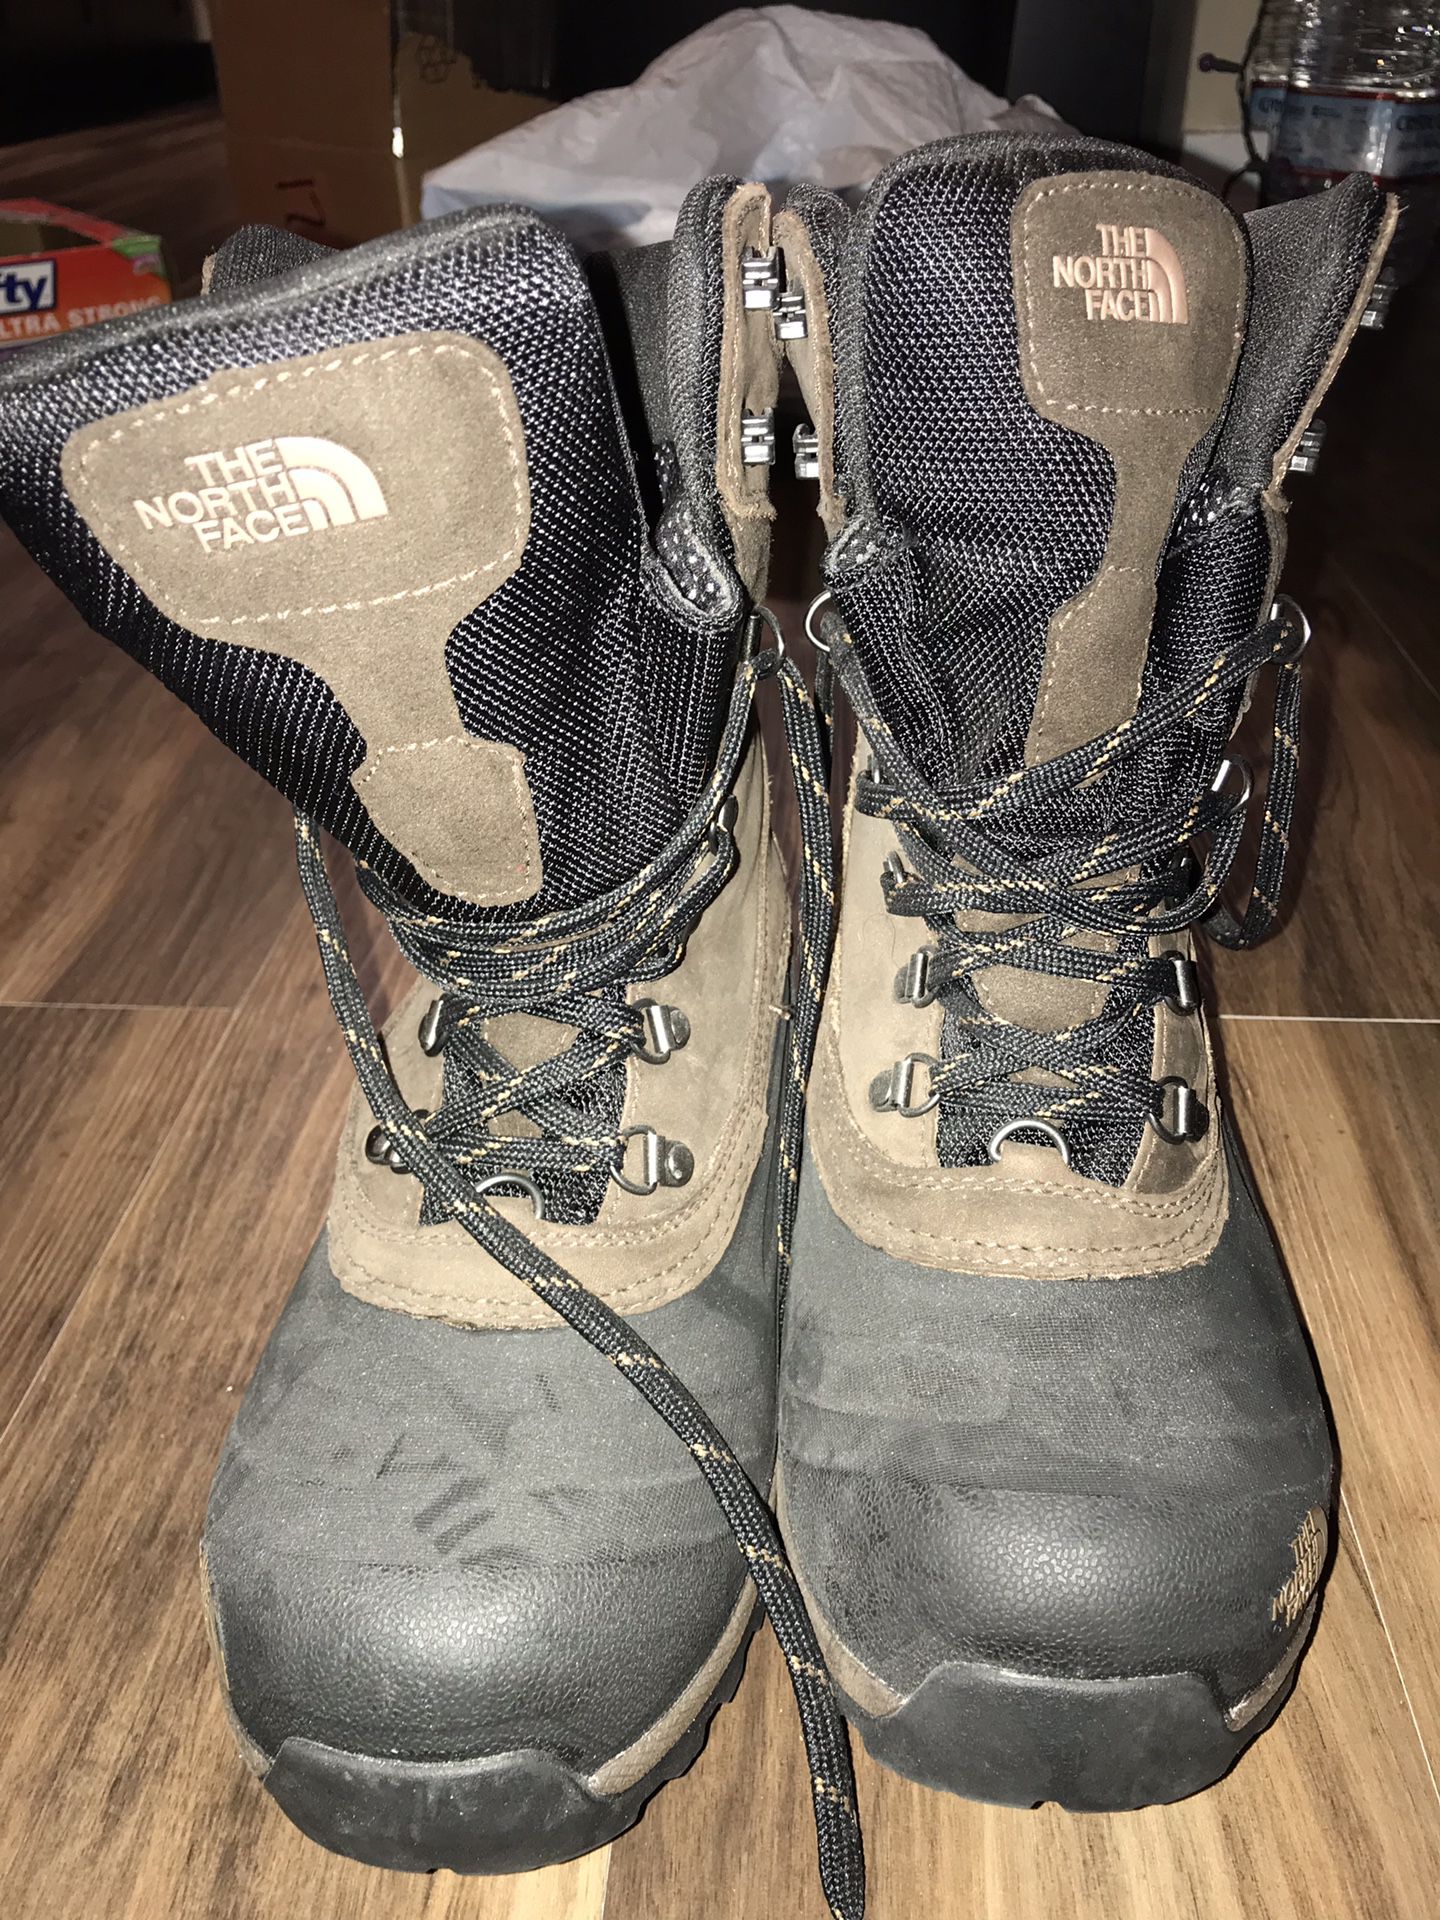 NORTH FACE MENS WATERPROOF BOOTS SIZE 8